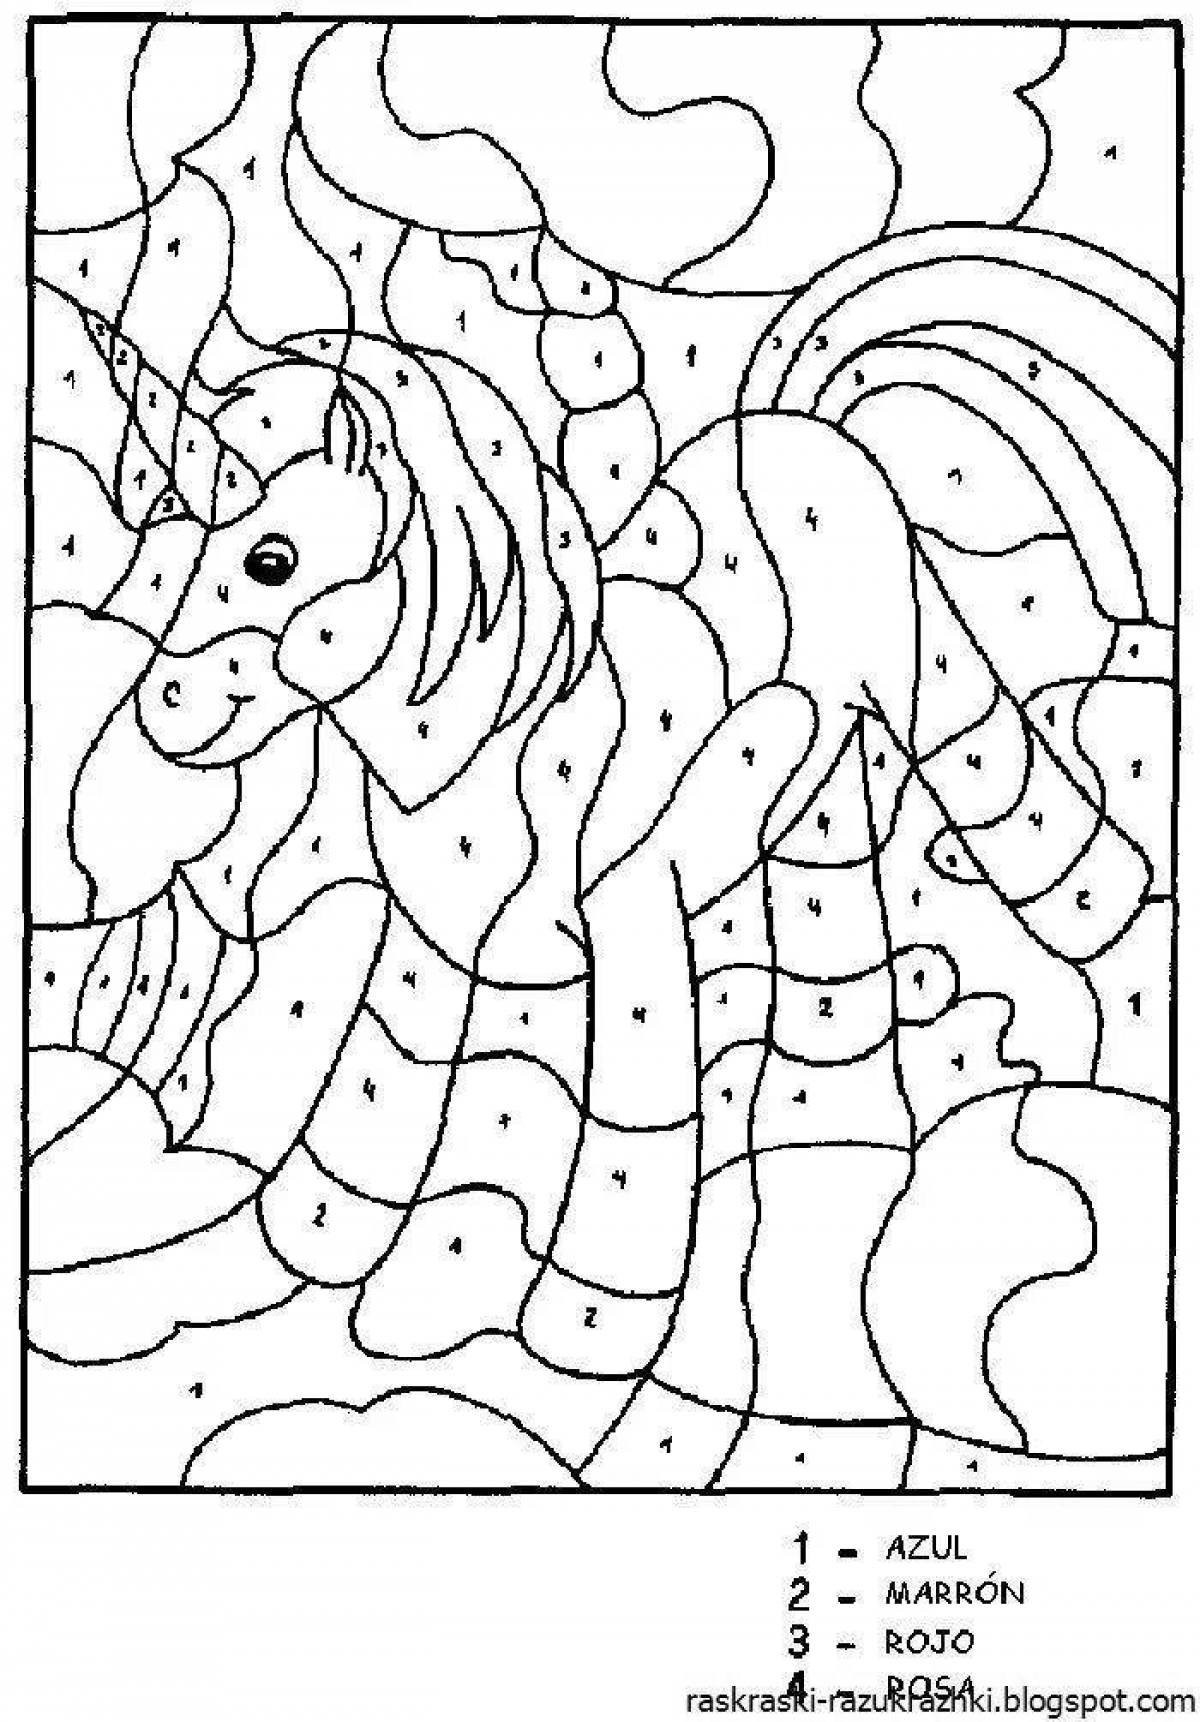 Mystical unicorn coloring by numbers